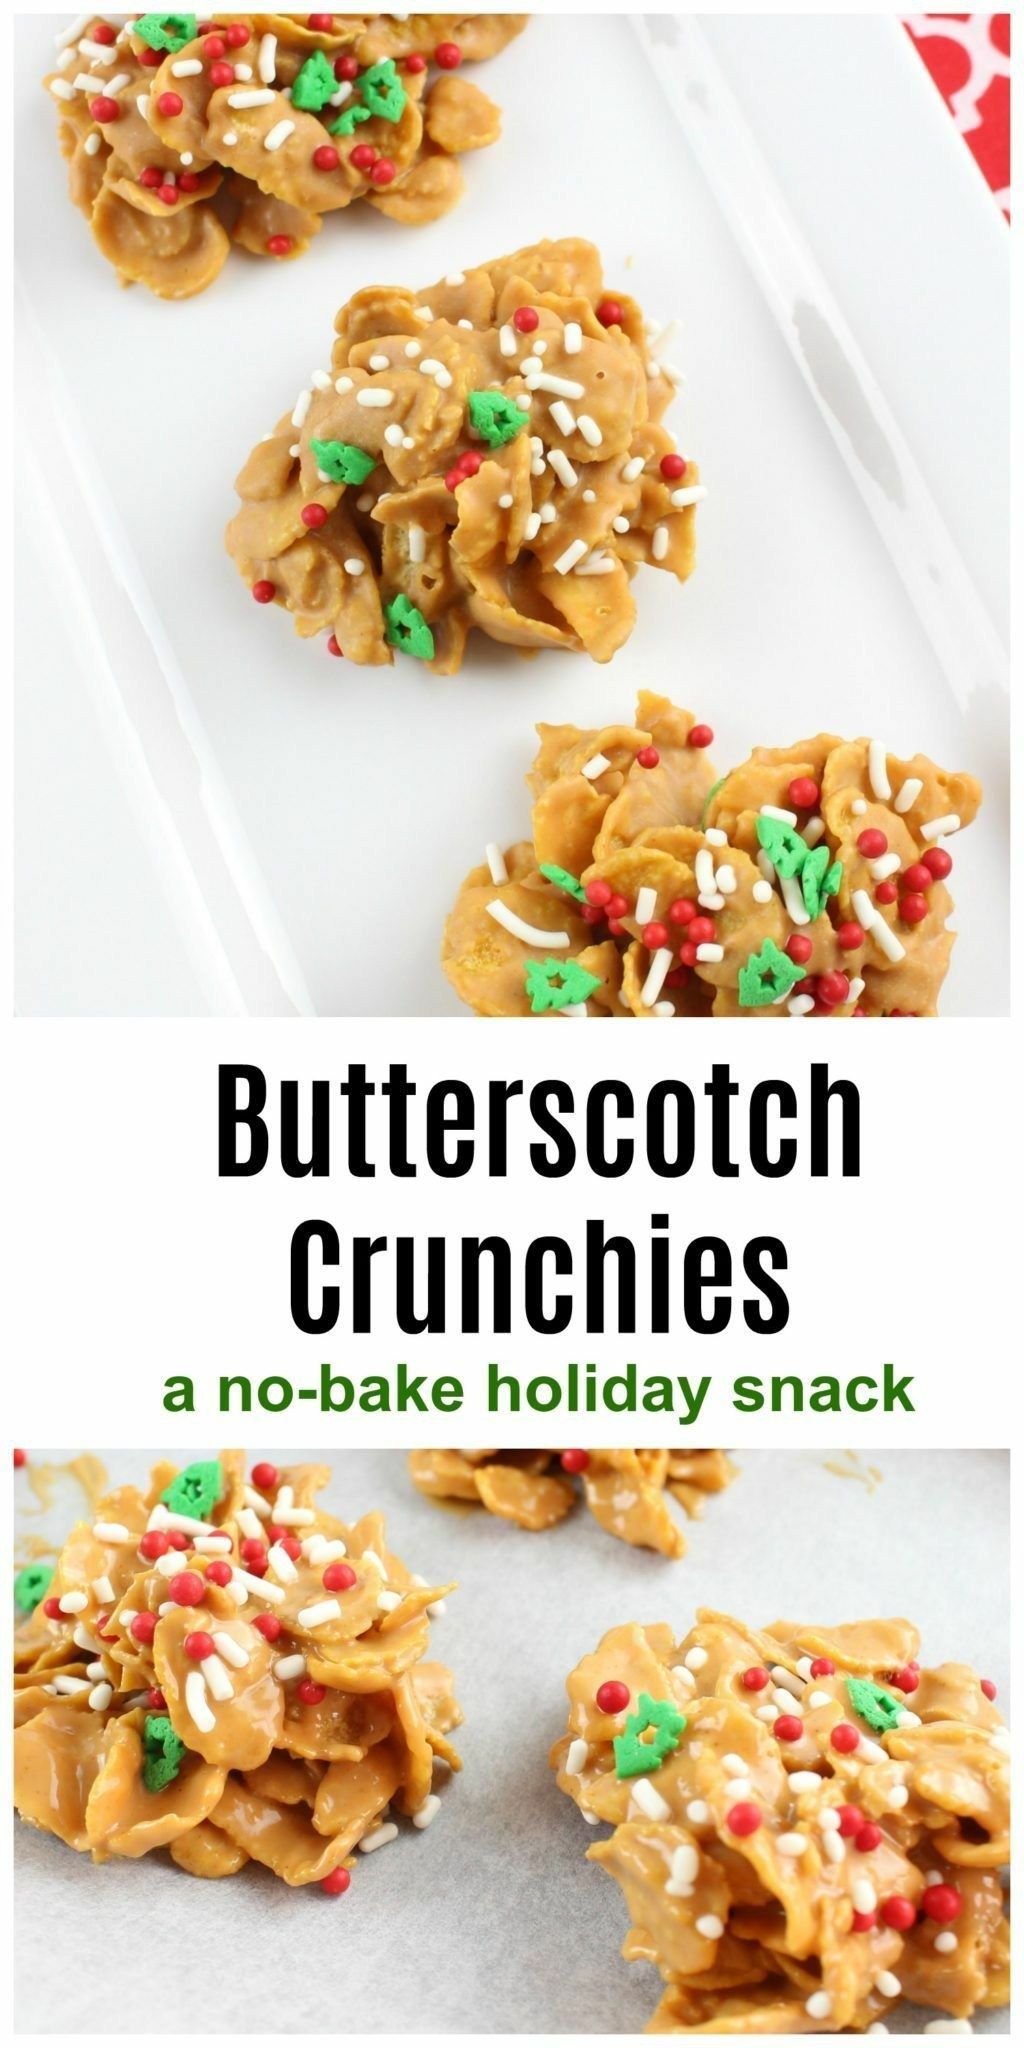 Butterscotch Cornflakes Crunchies- No Bake Holiday Snack -   19 christmas cookies recipes easy no bake ideas